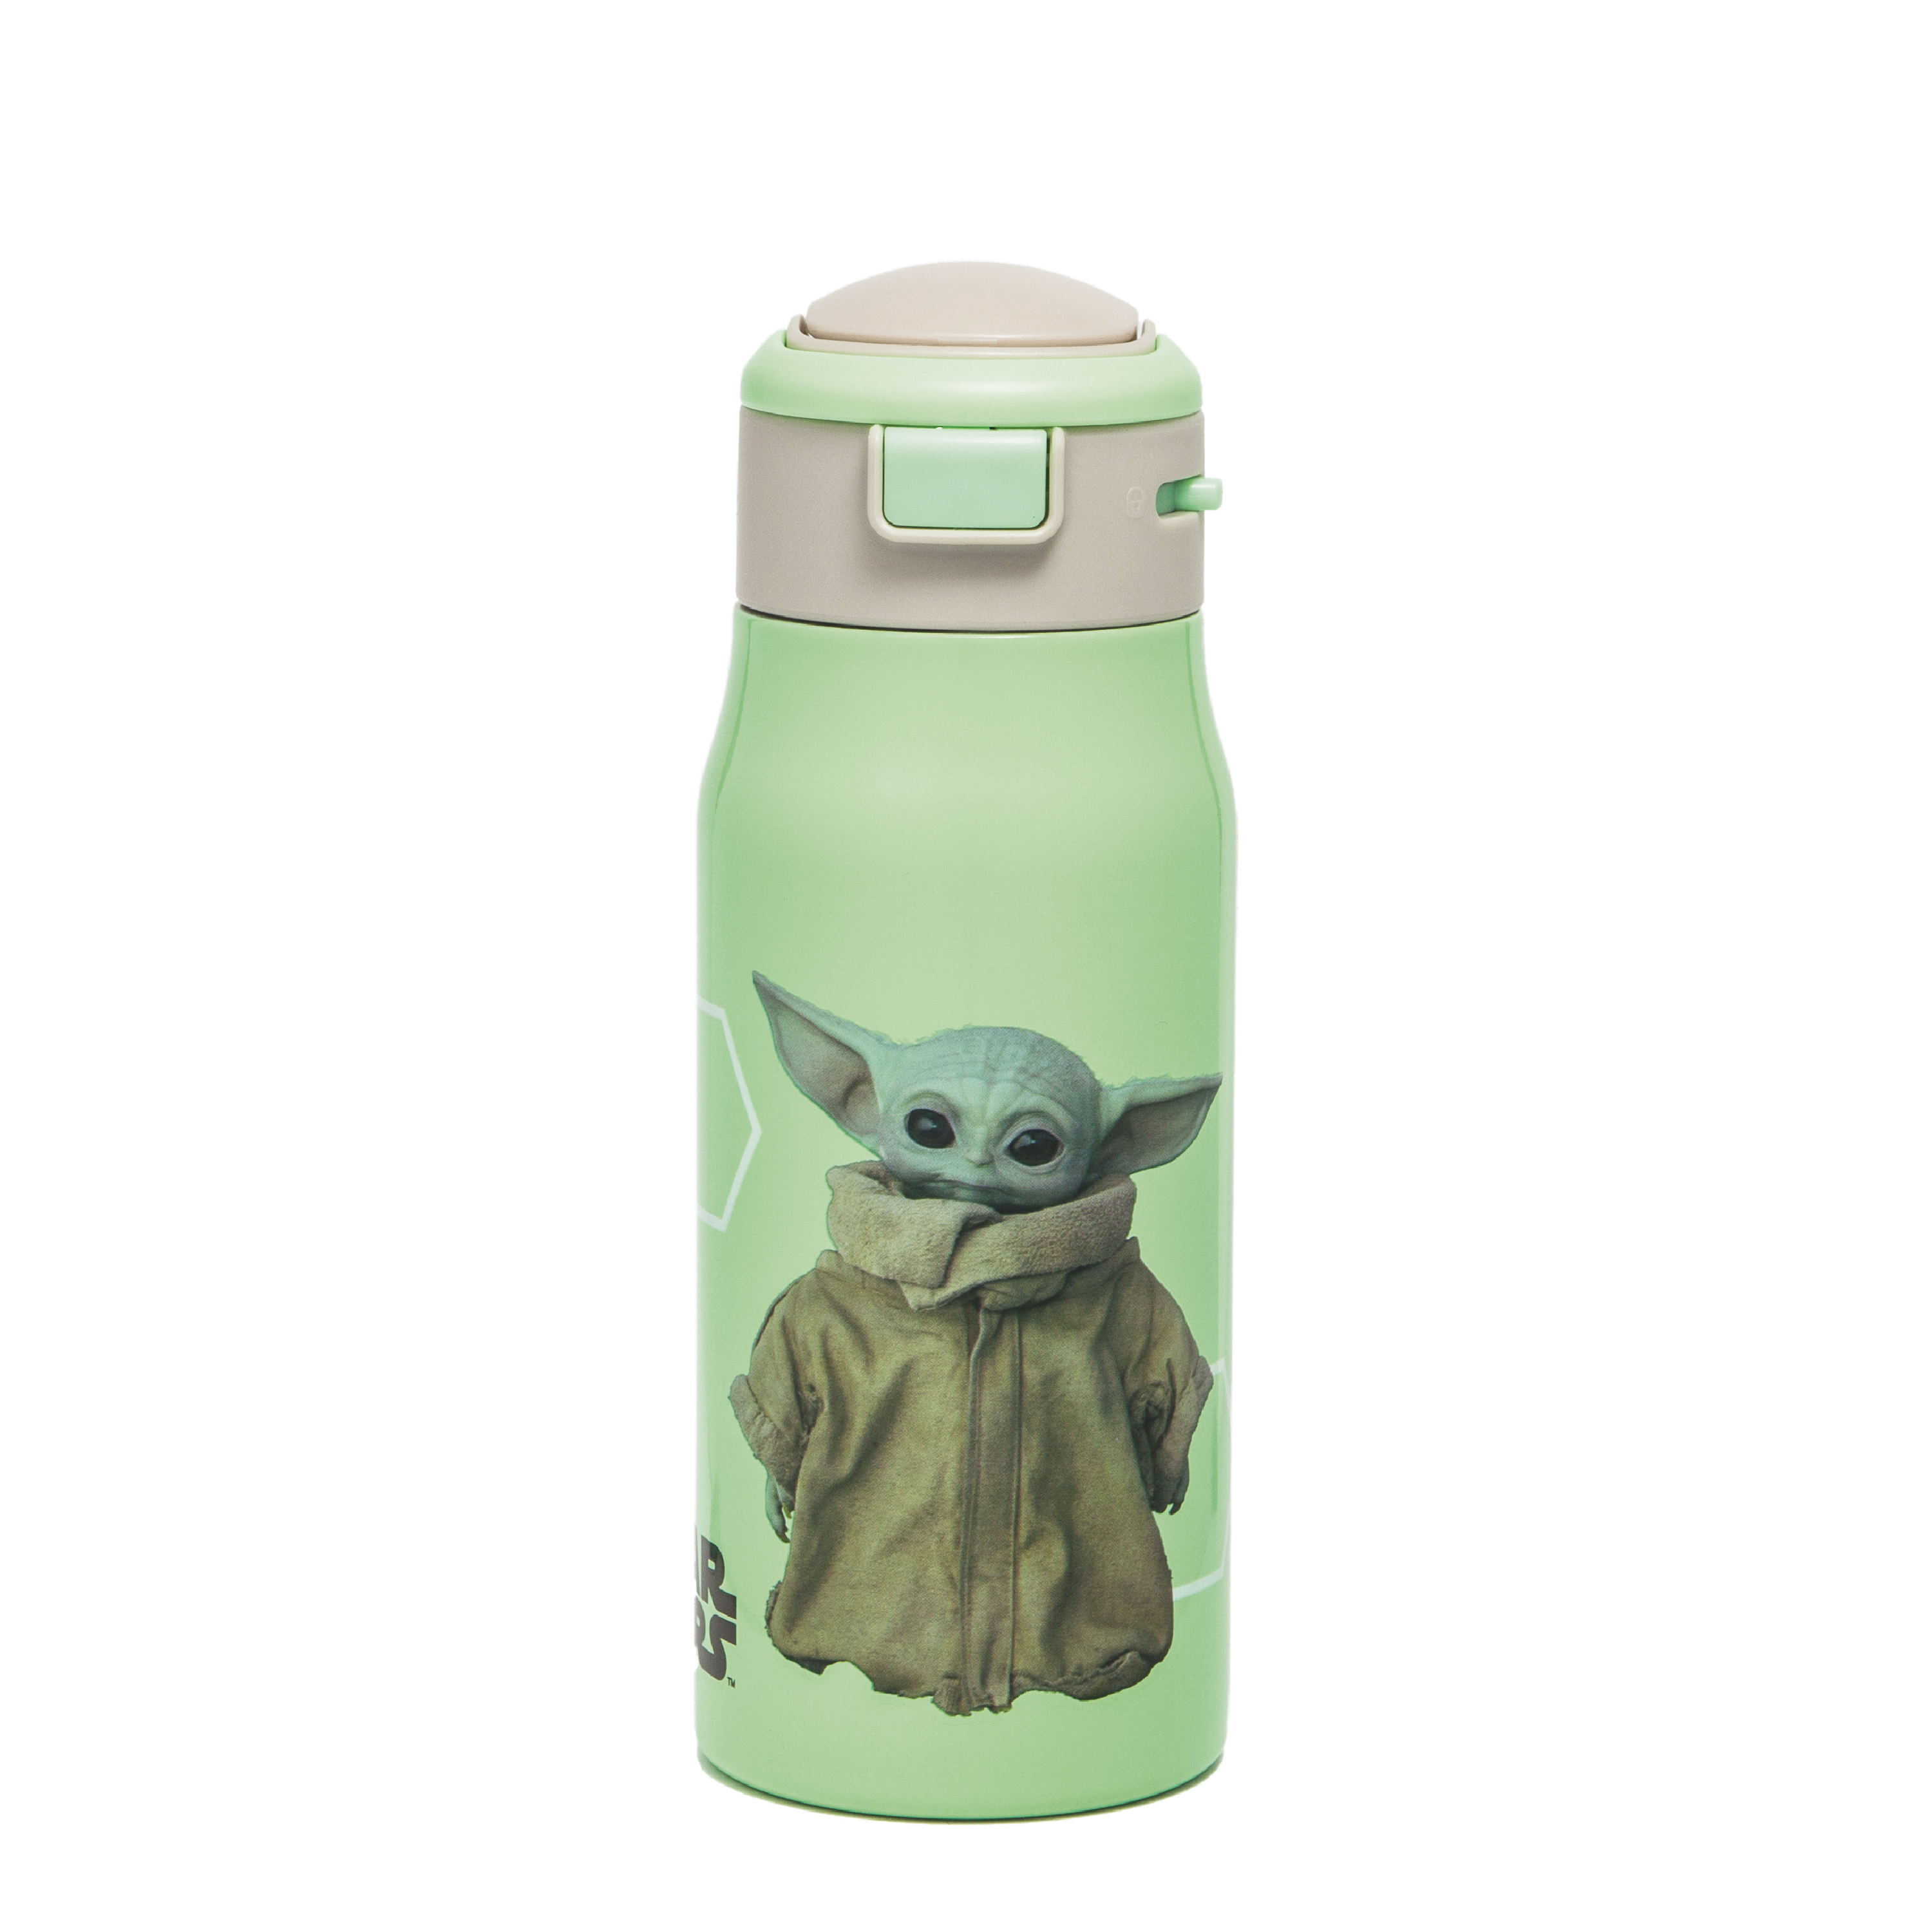 Star Wars 13.5 ounce Mesa Double Wall Insulated Stainless Steel Water Bottle, The Mandelorian slideshow image 1